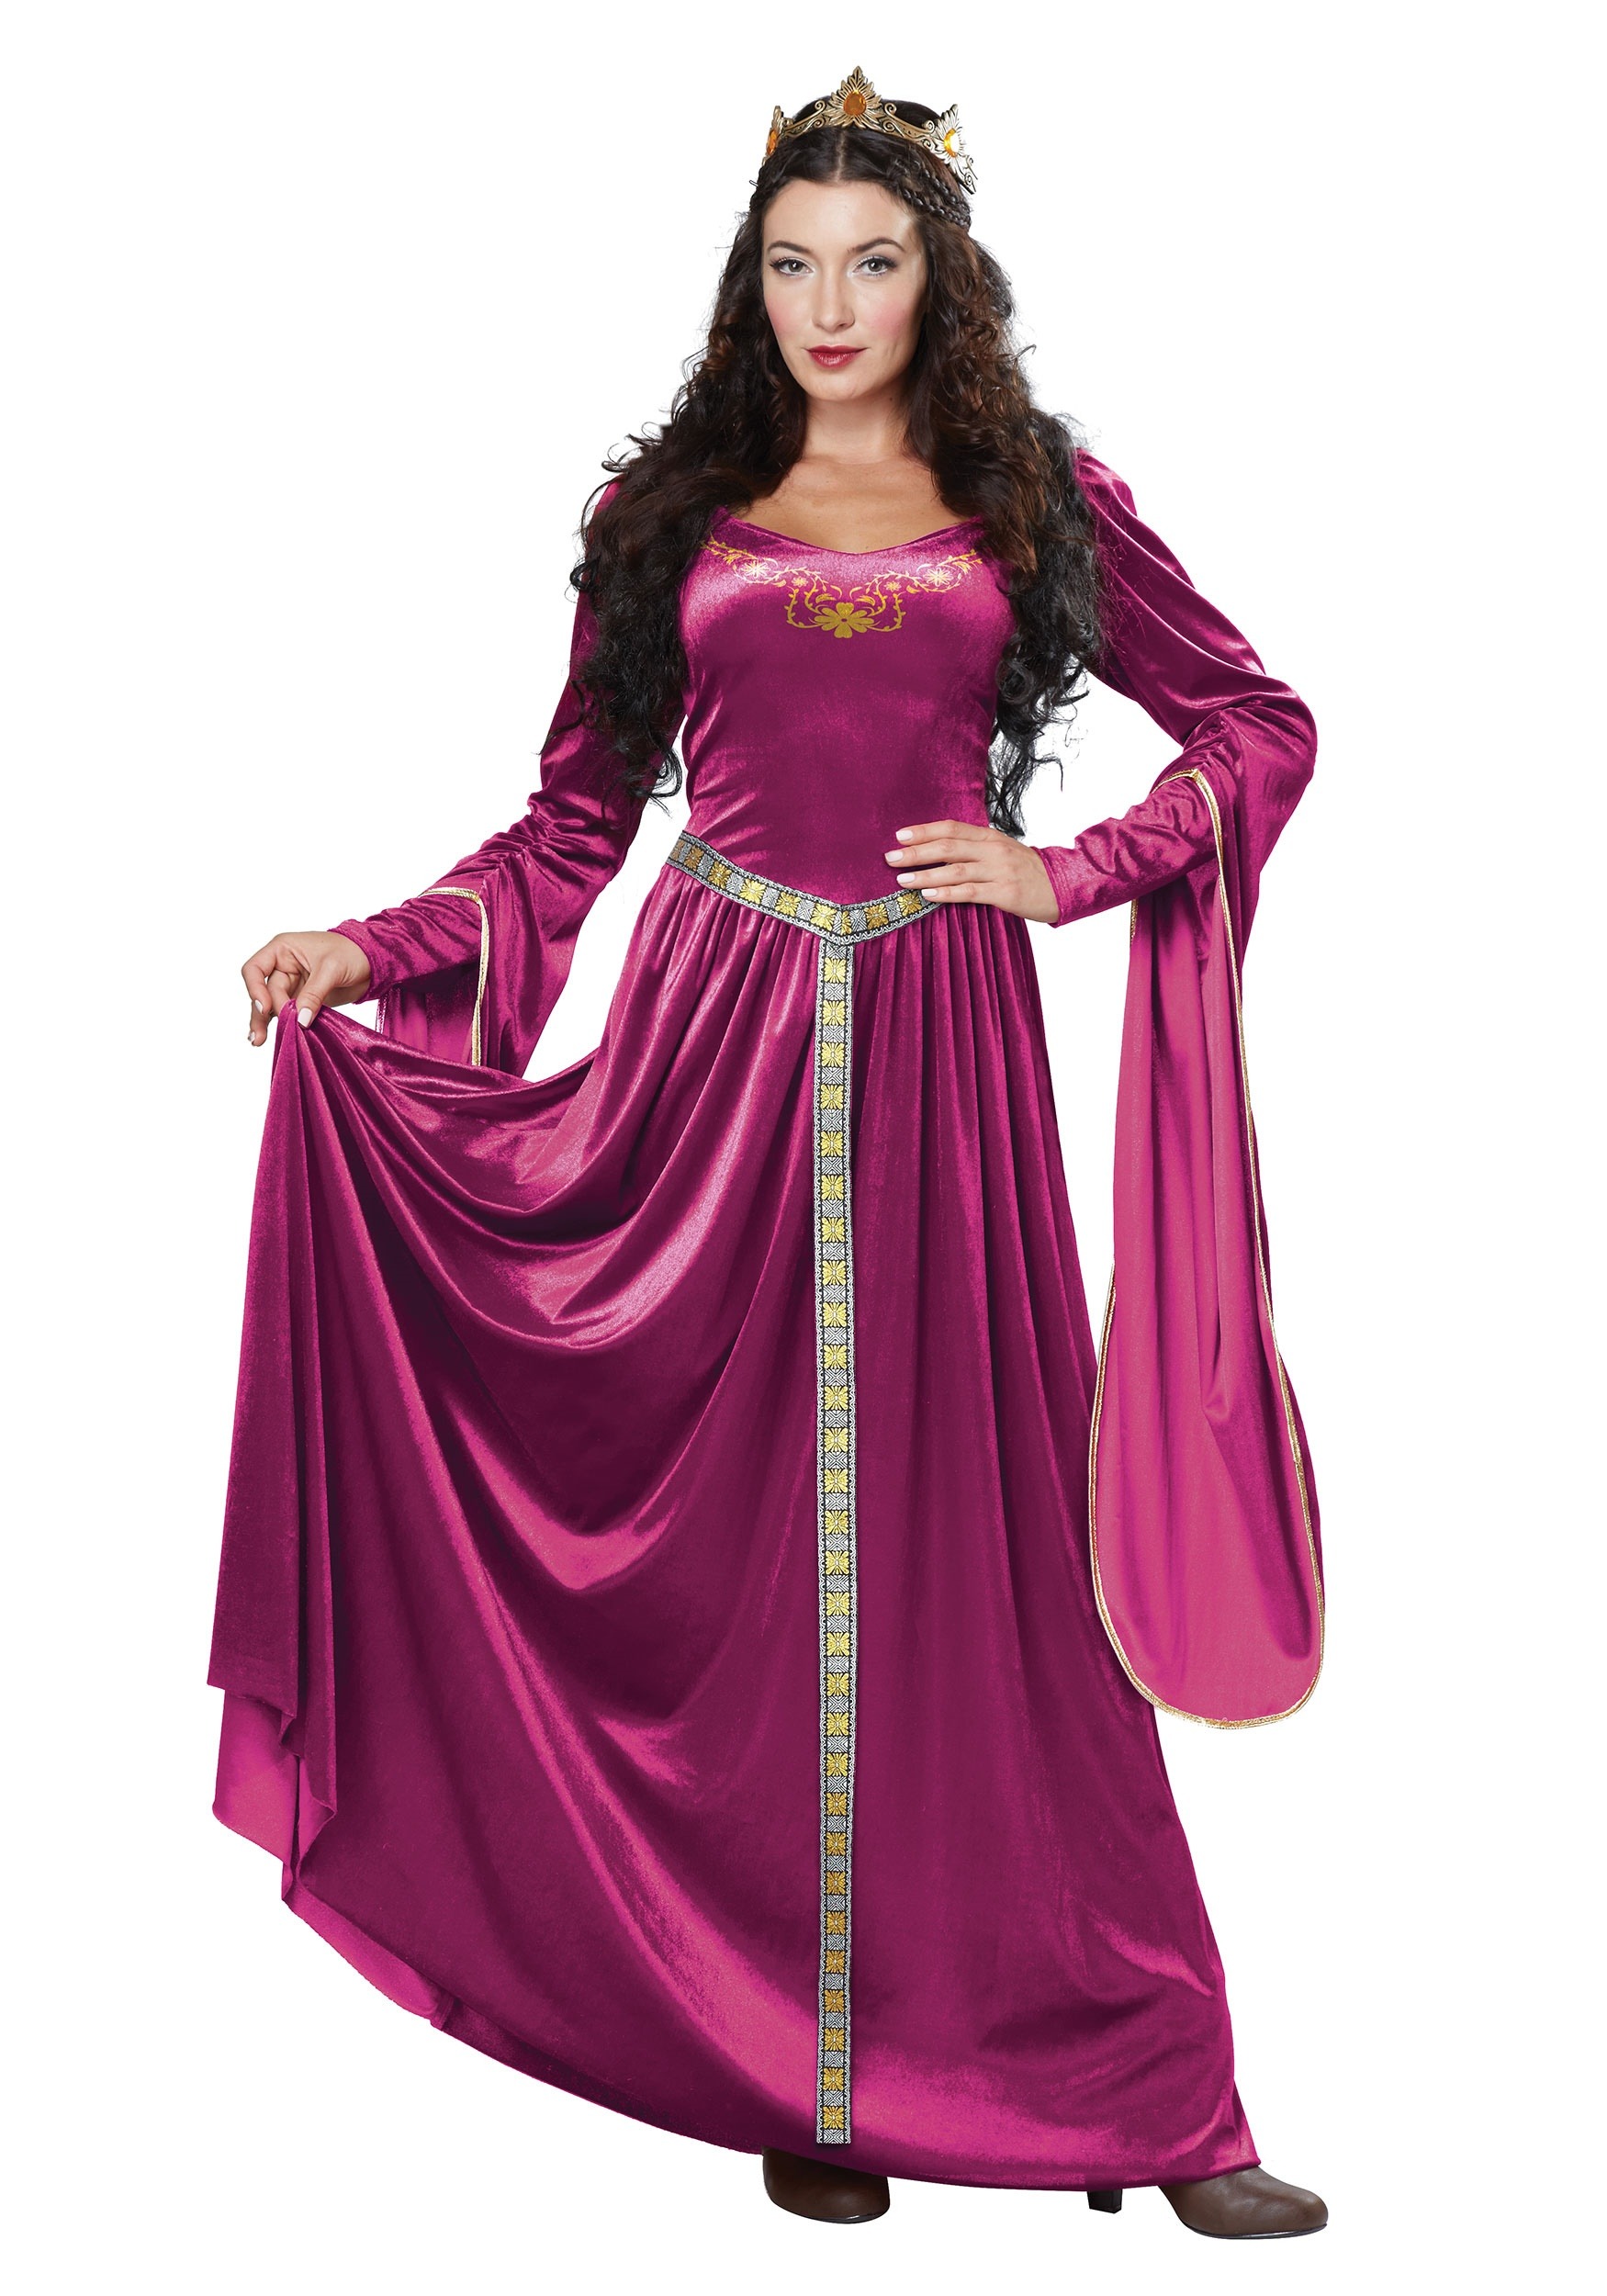 Women’s Lady Guinevere Costume